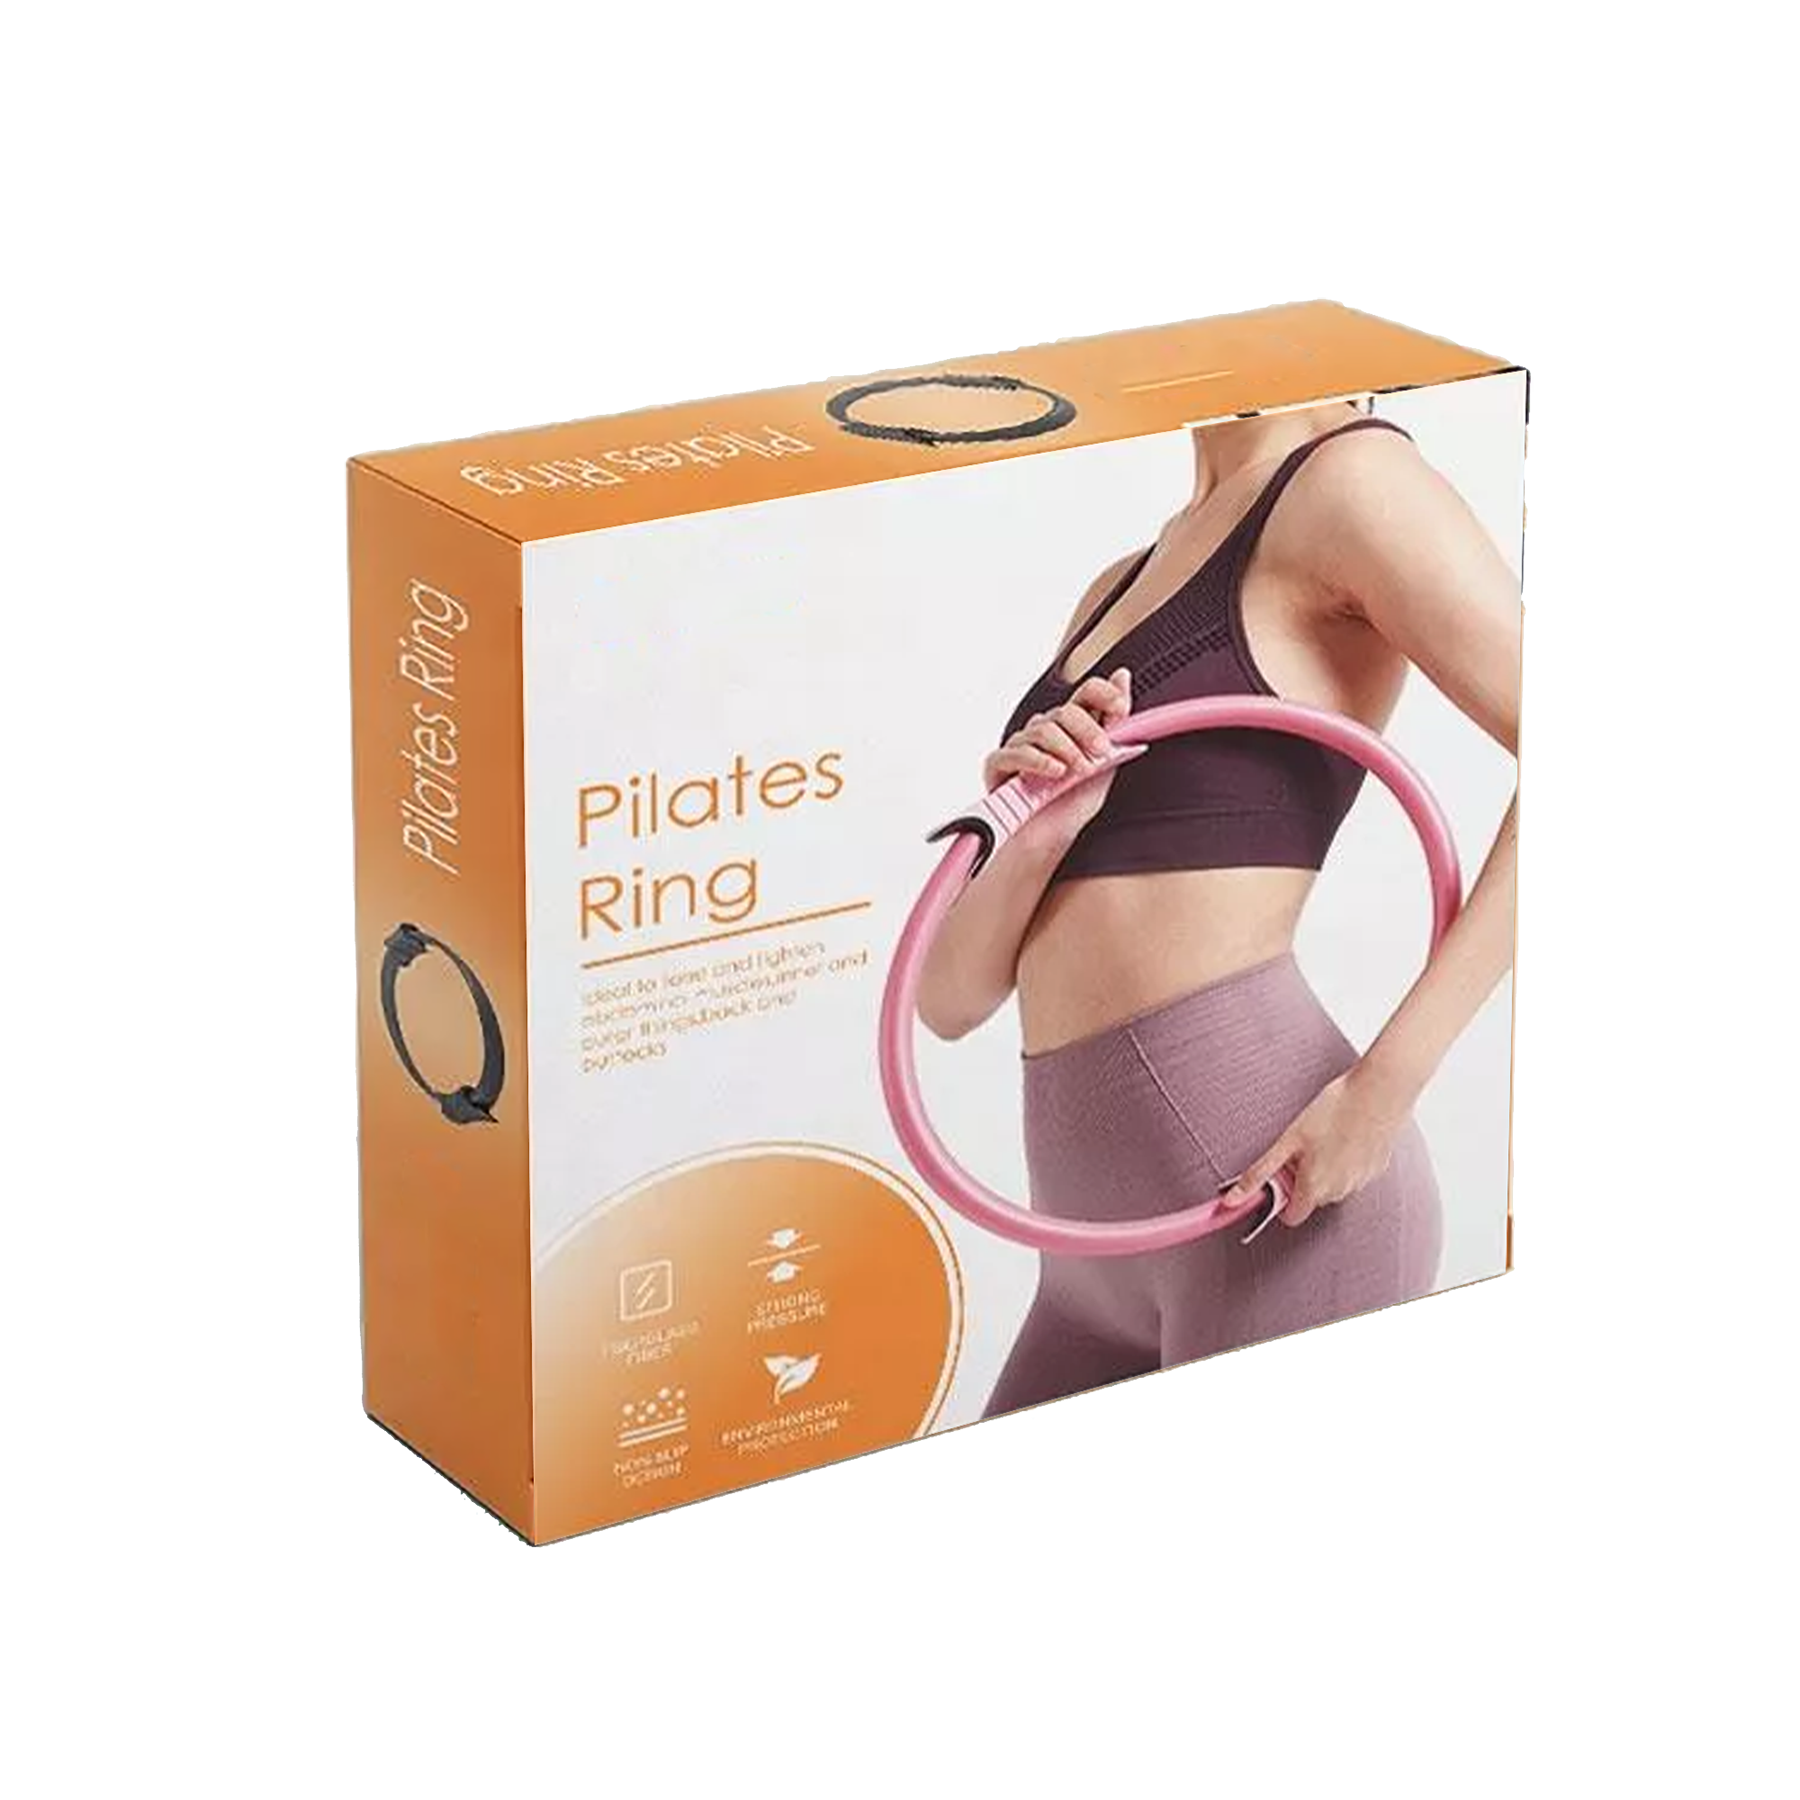 Yoga Circle Exercise Pilates Ring with Full Body Toning Fitness for Stretching, Relaxation